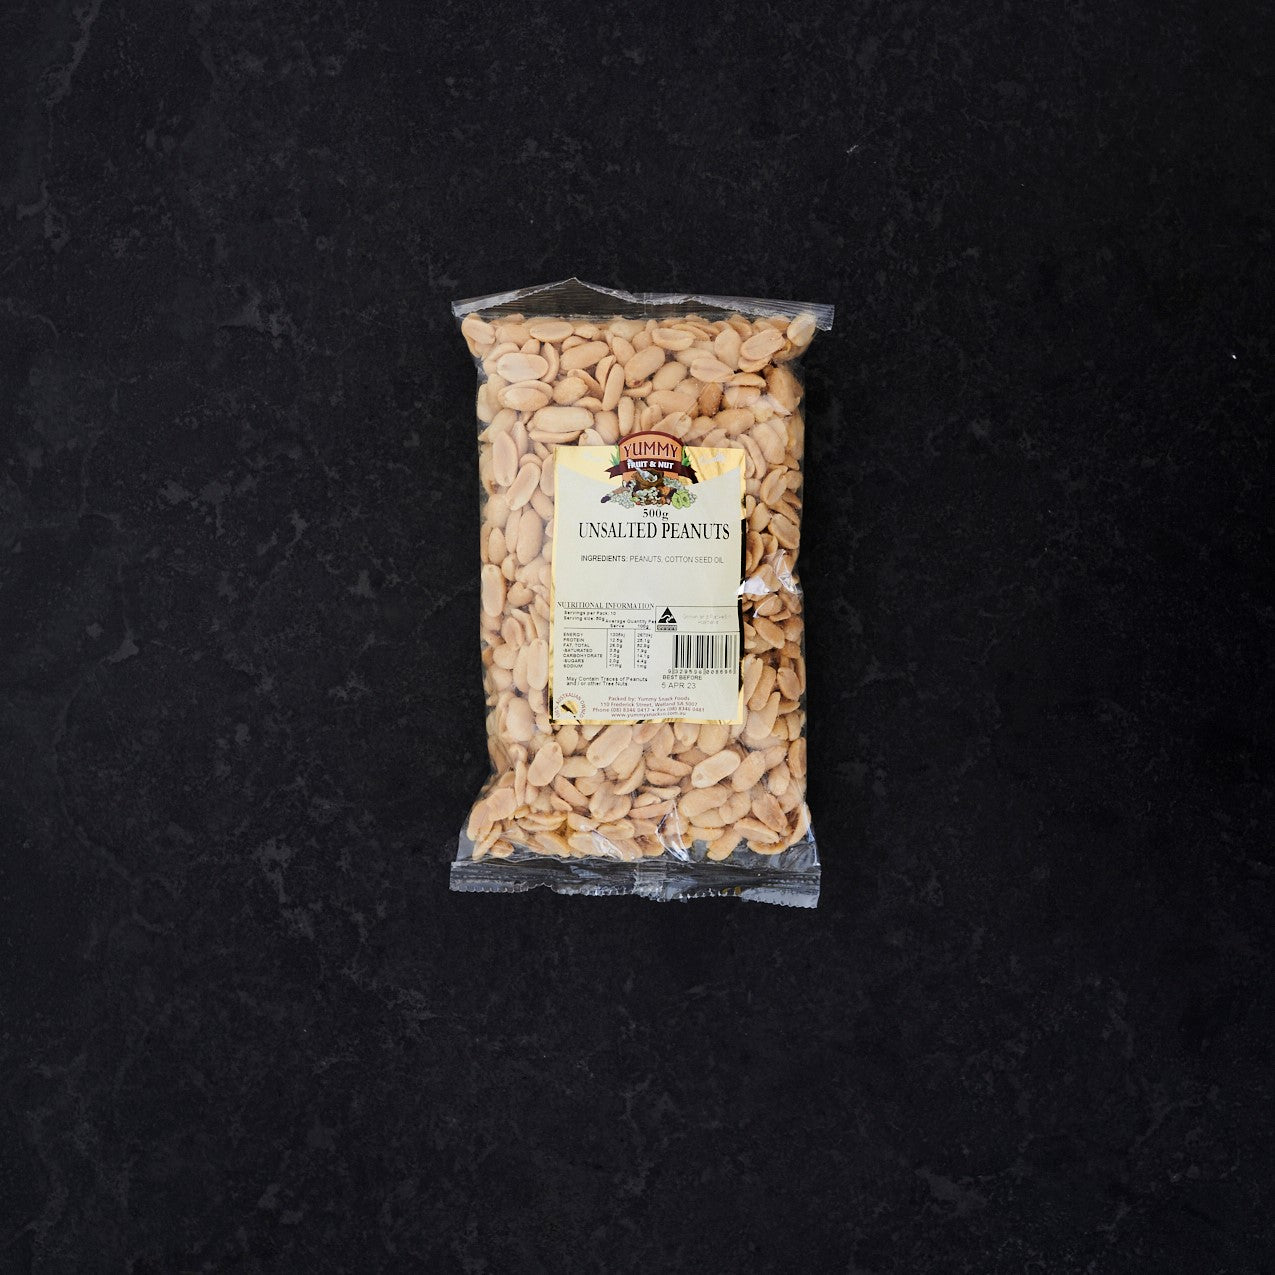 Yummy Snack Co Peanuts Unsalted 500g